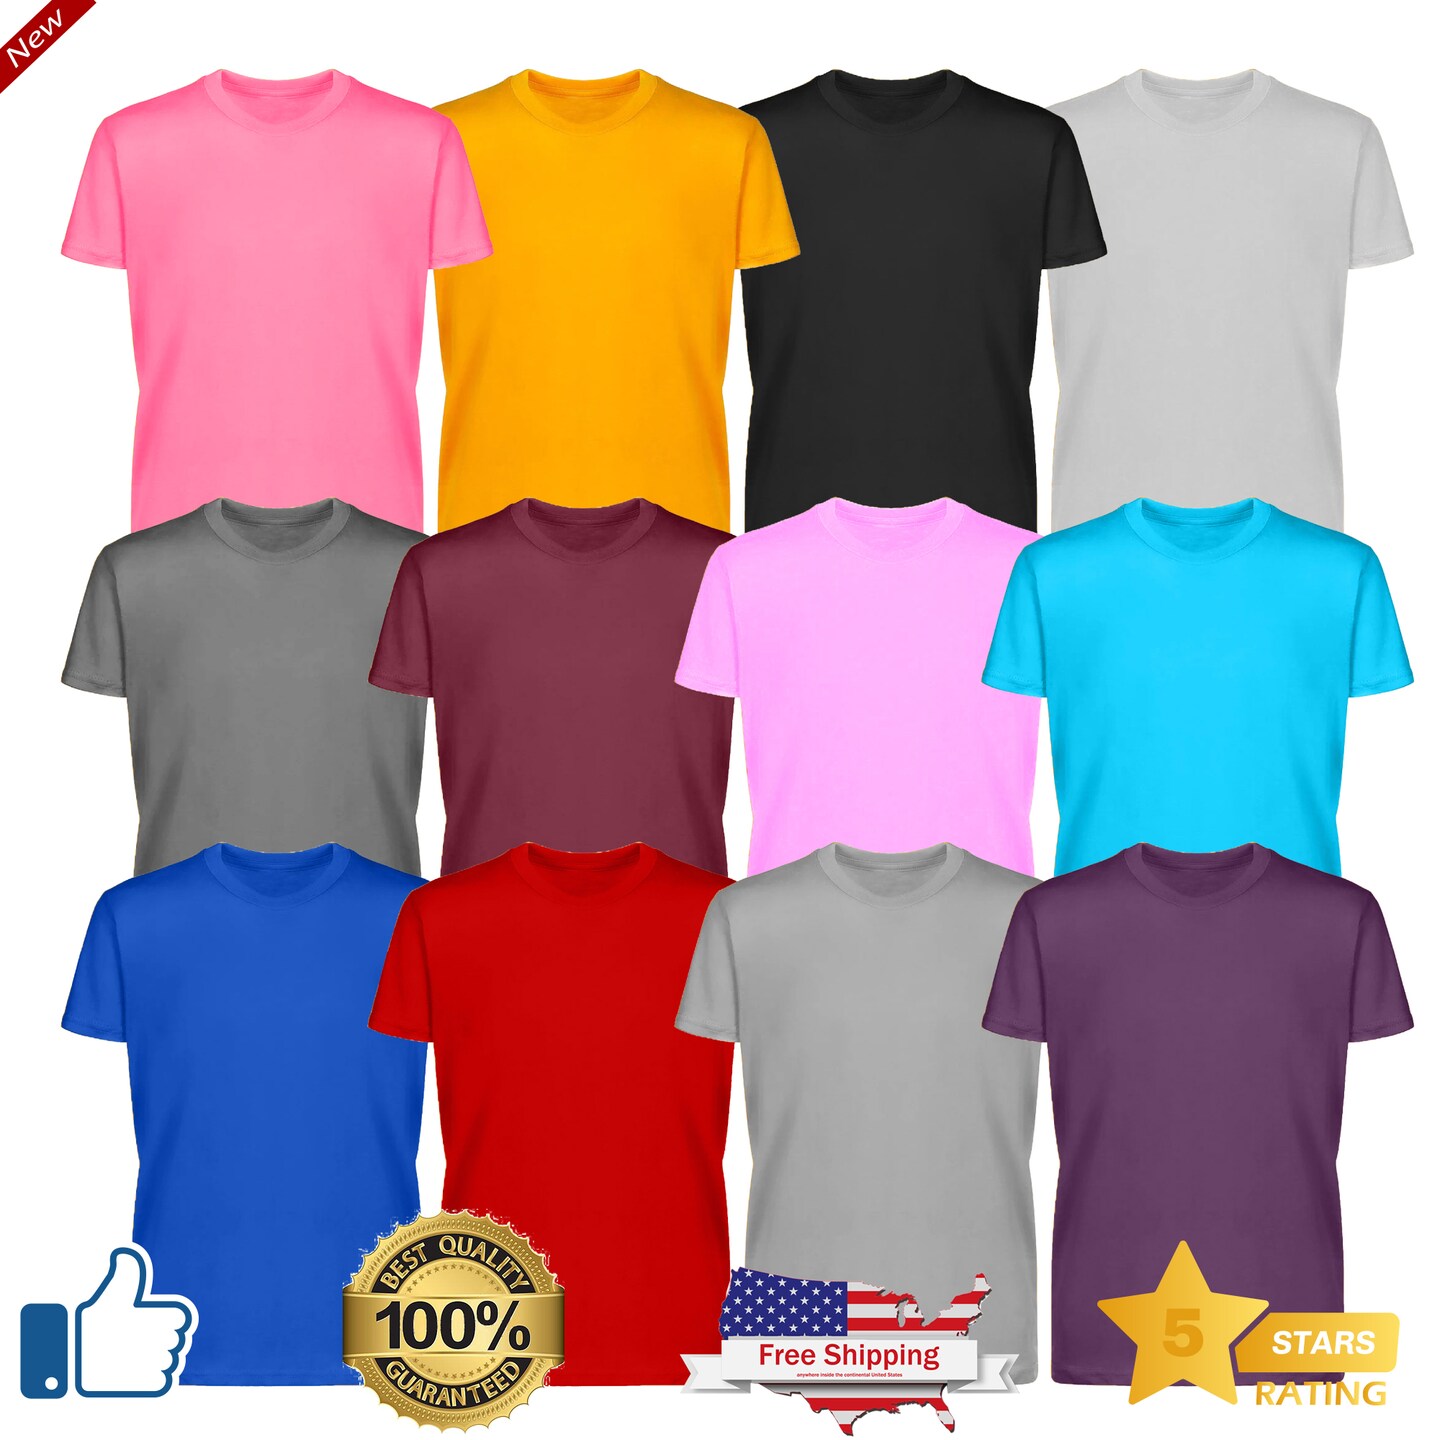 Kids Pack size T-shirts - 100% Cotton Short Sleeve T-shirts, Cool and  Cute T-shirts for Fashion-Forward Kids - Summer Tees, RADYAN